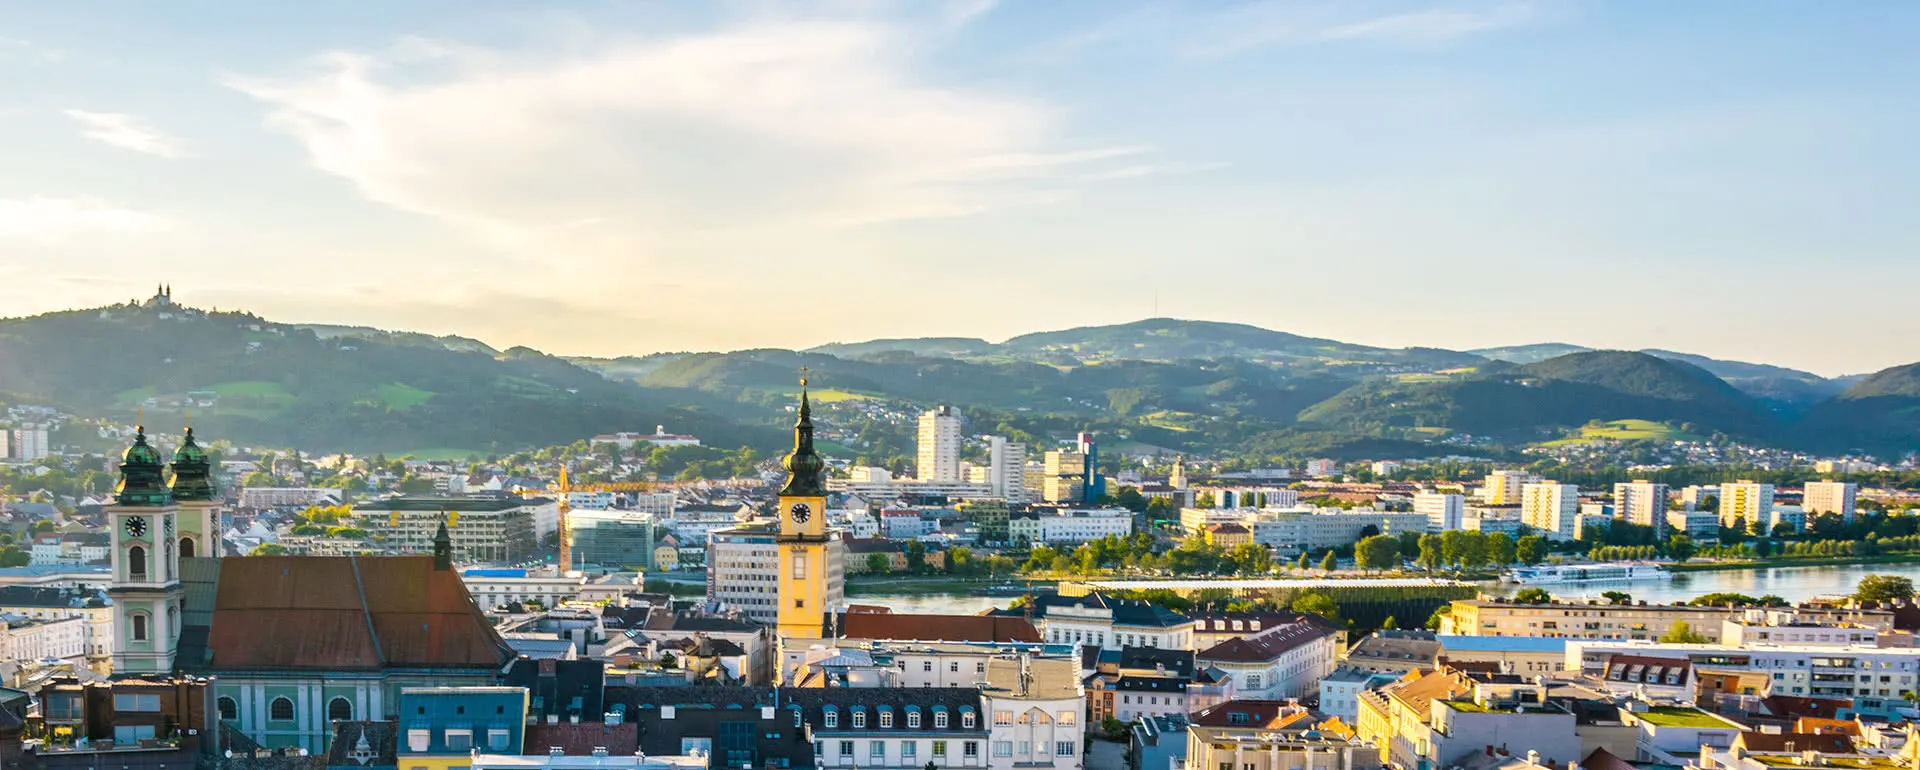 Linz - the destination with youth hostels